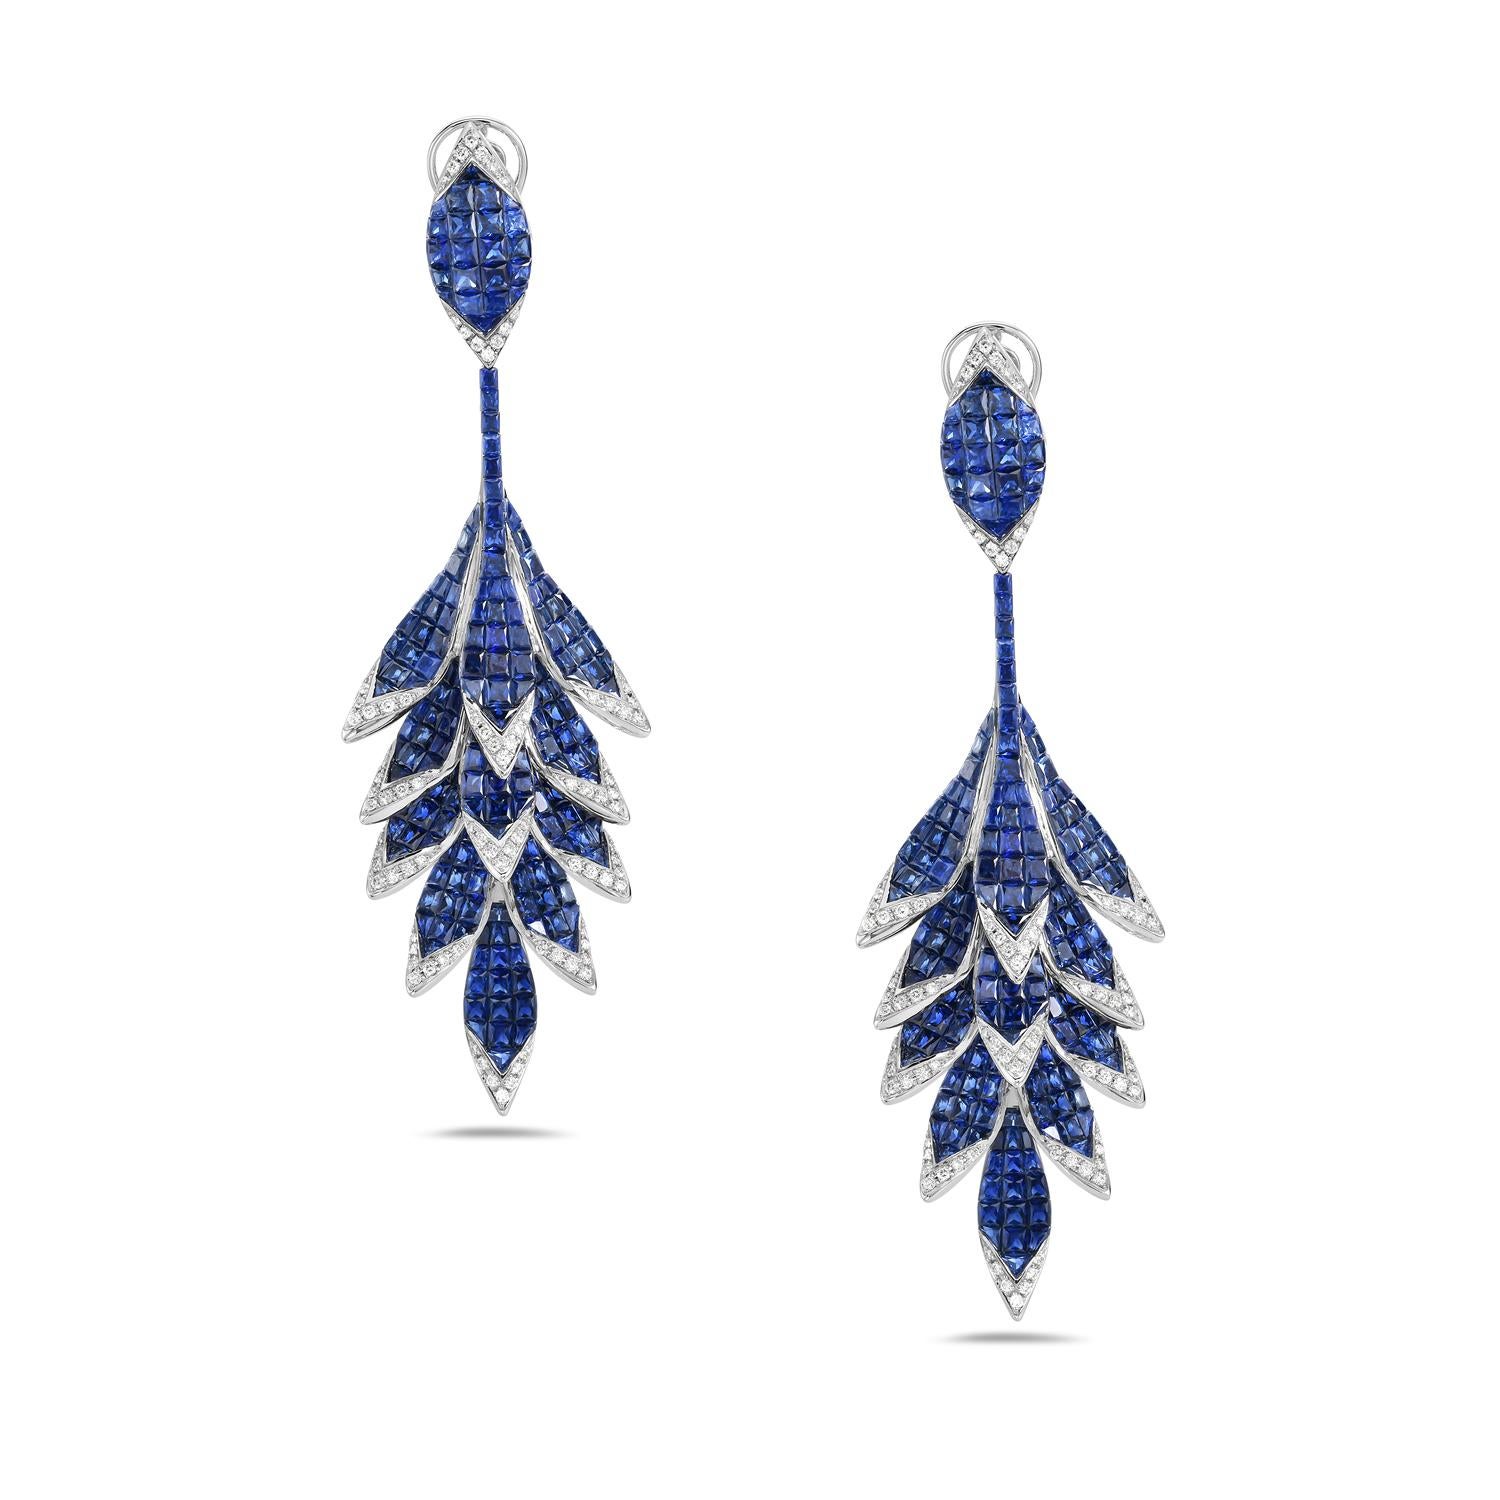 Mixed Cut 36.52 ct Blue Sapphire Studded Dangle Earrings Made In 18k Gold With Diamonds For Sale